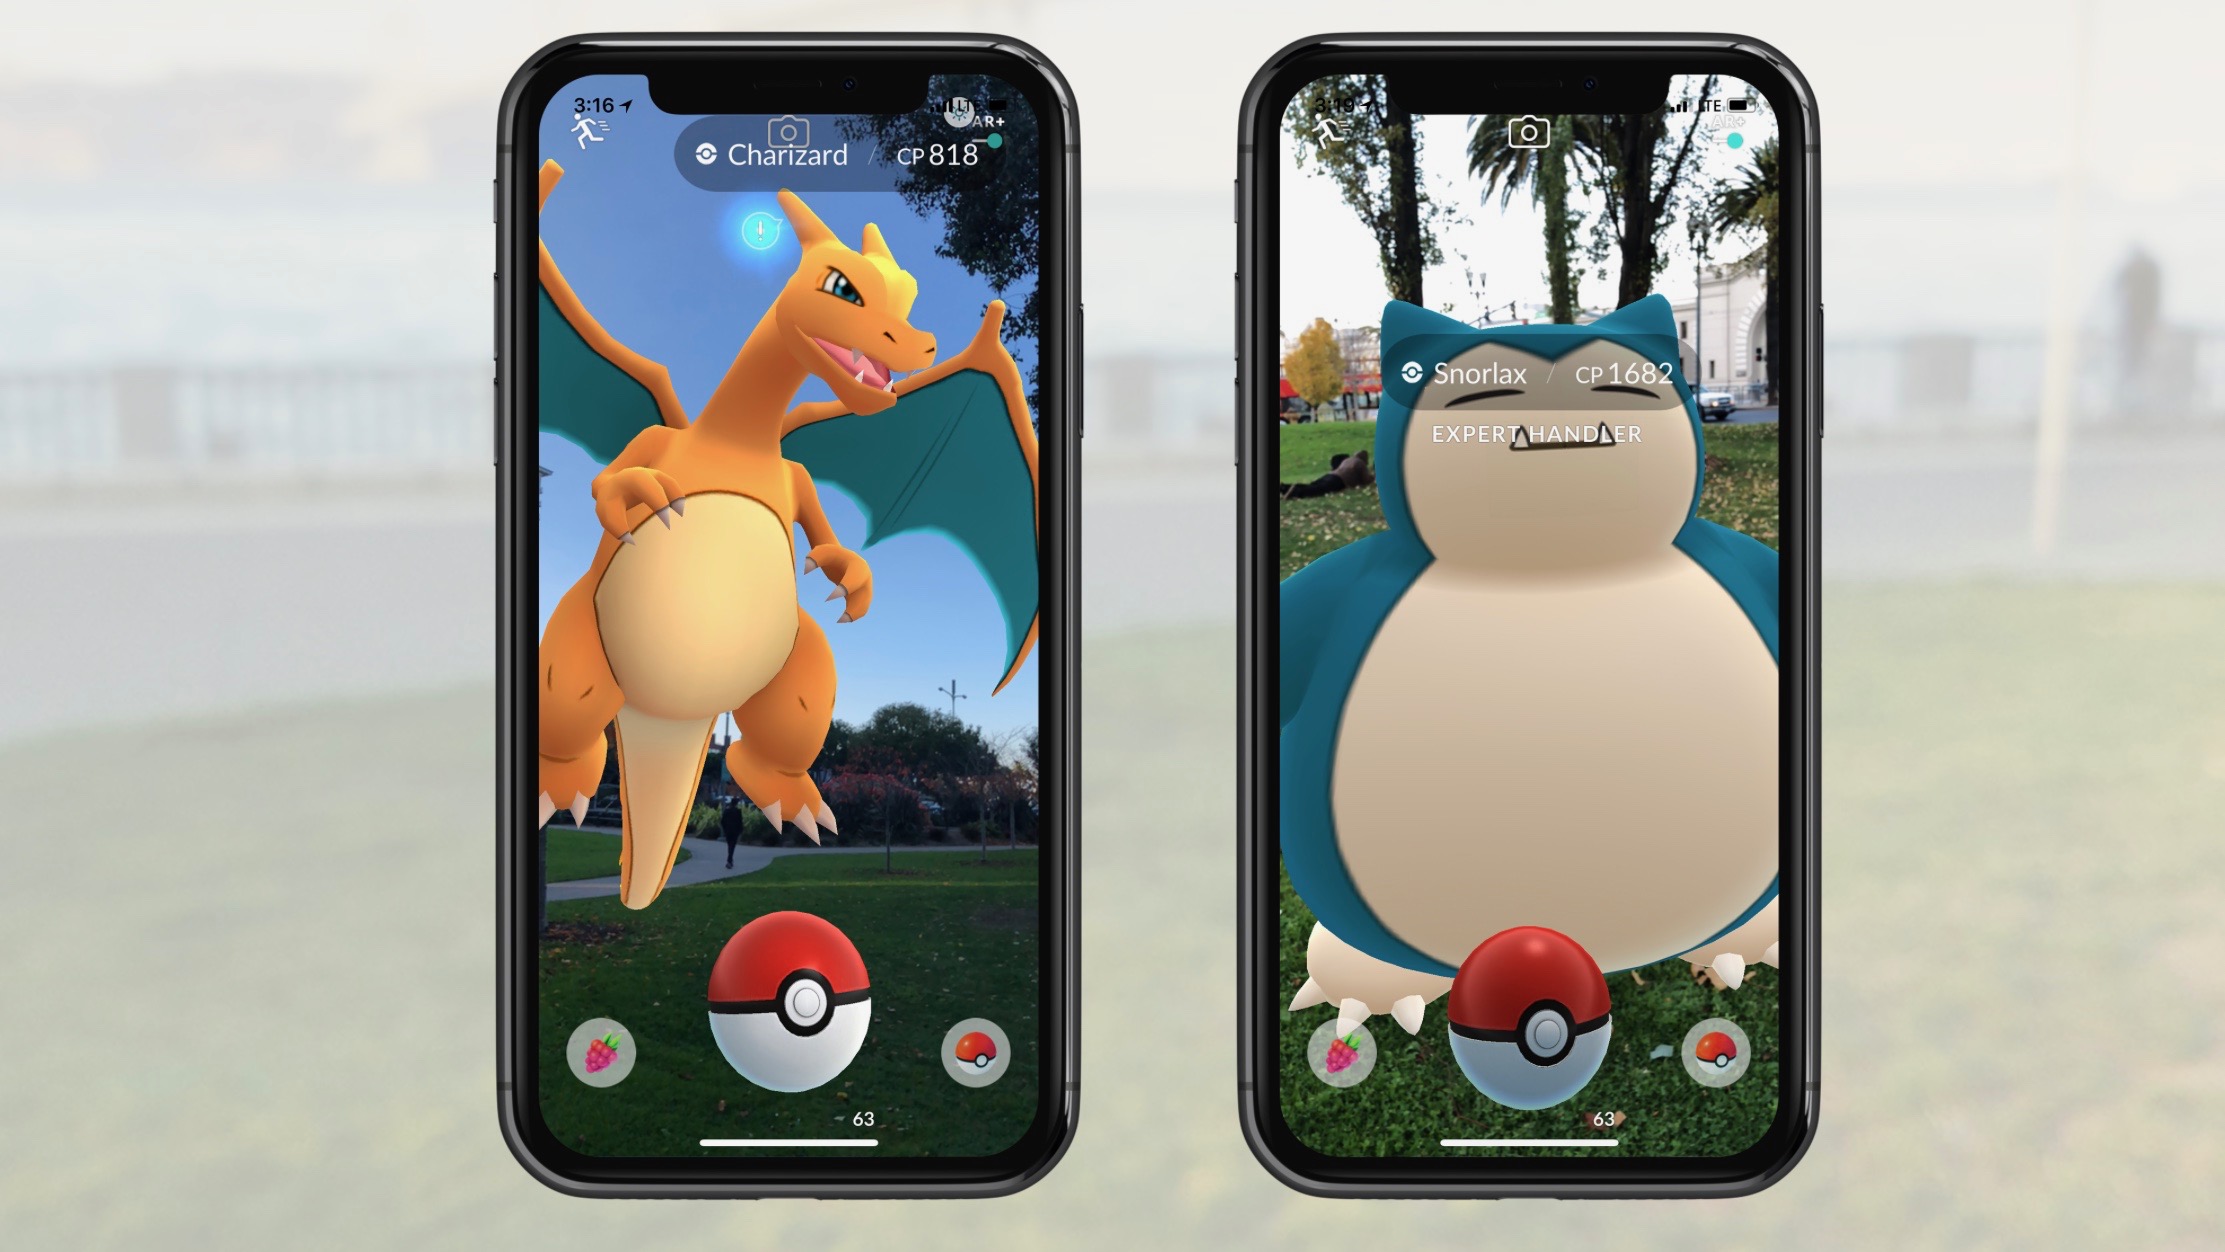 Pokémon GO gaining iPhone exclusive AR+ mode powered by Apple’s ARKit.